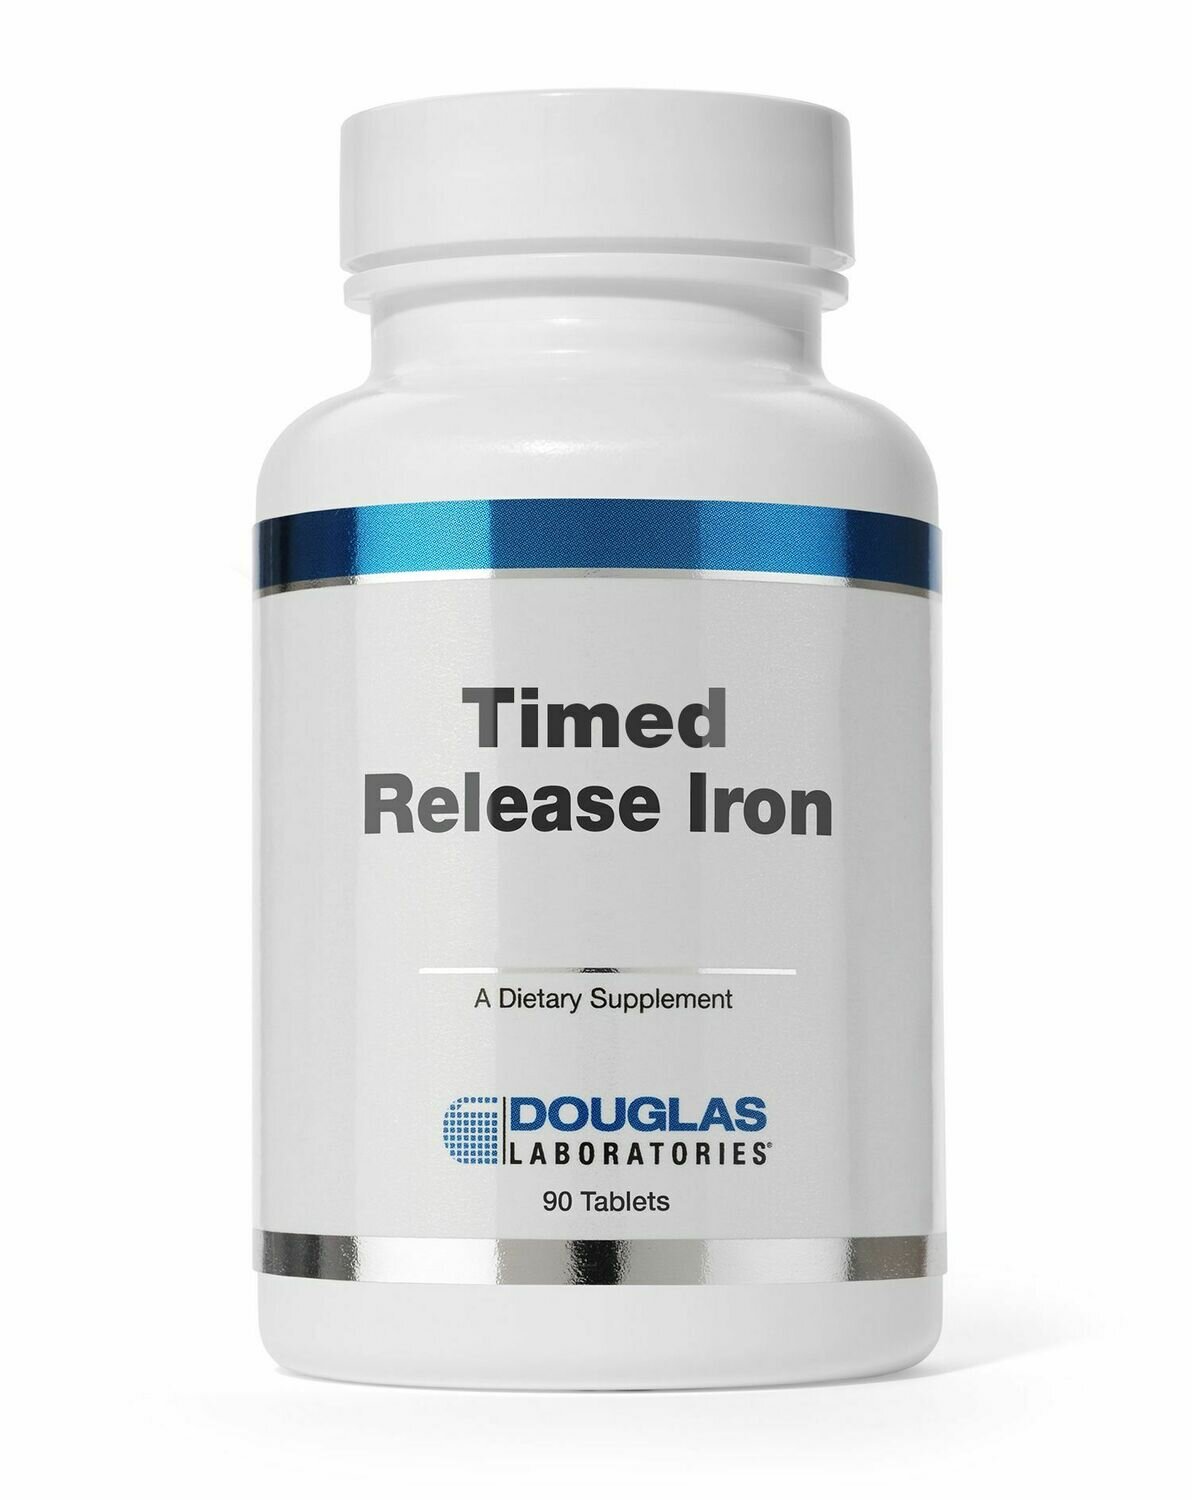 Timed Release Iron